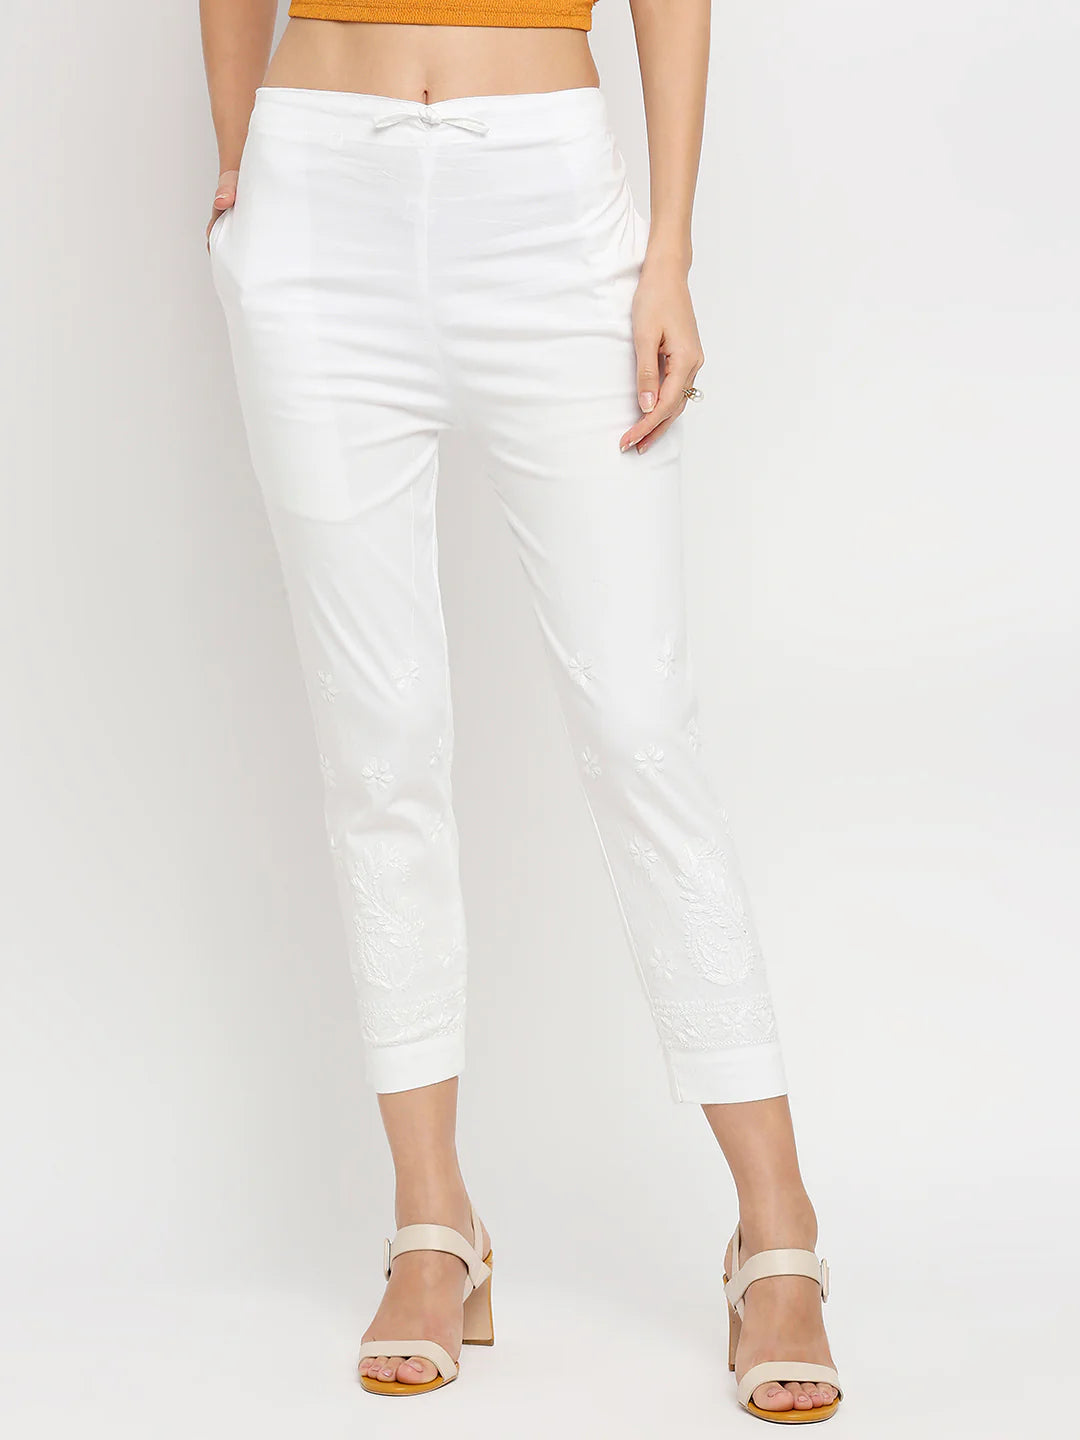 Buy White Grey Cotton Solid Cigarette Pants Online in India  Juniper  Fashion